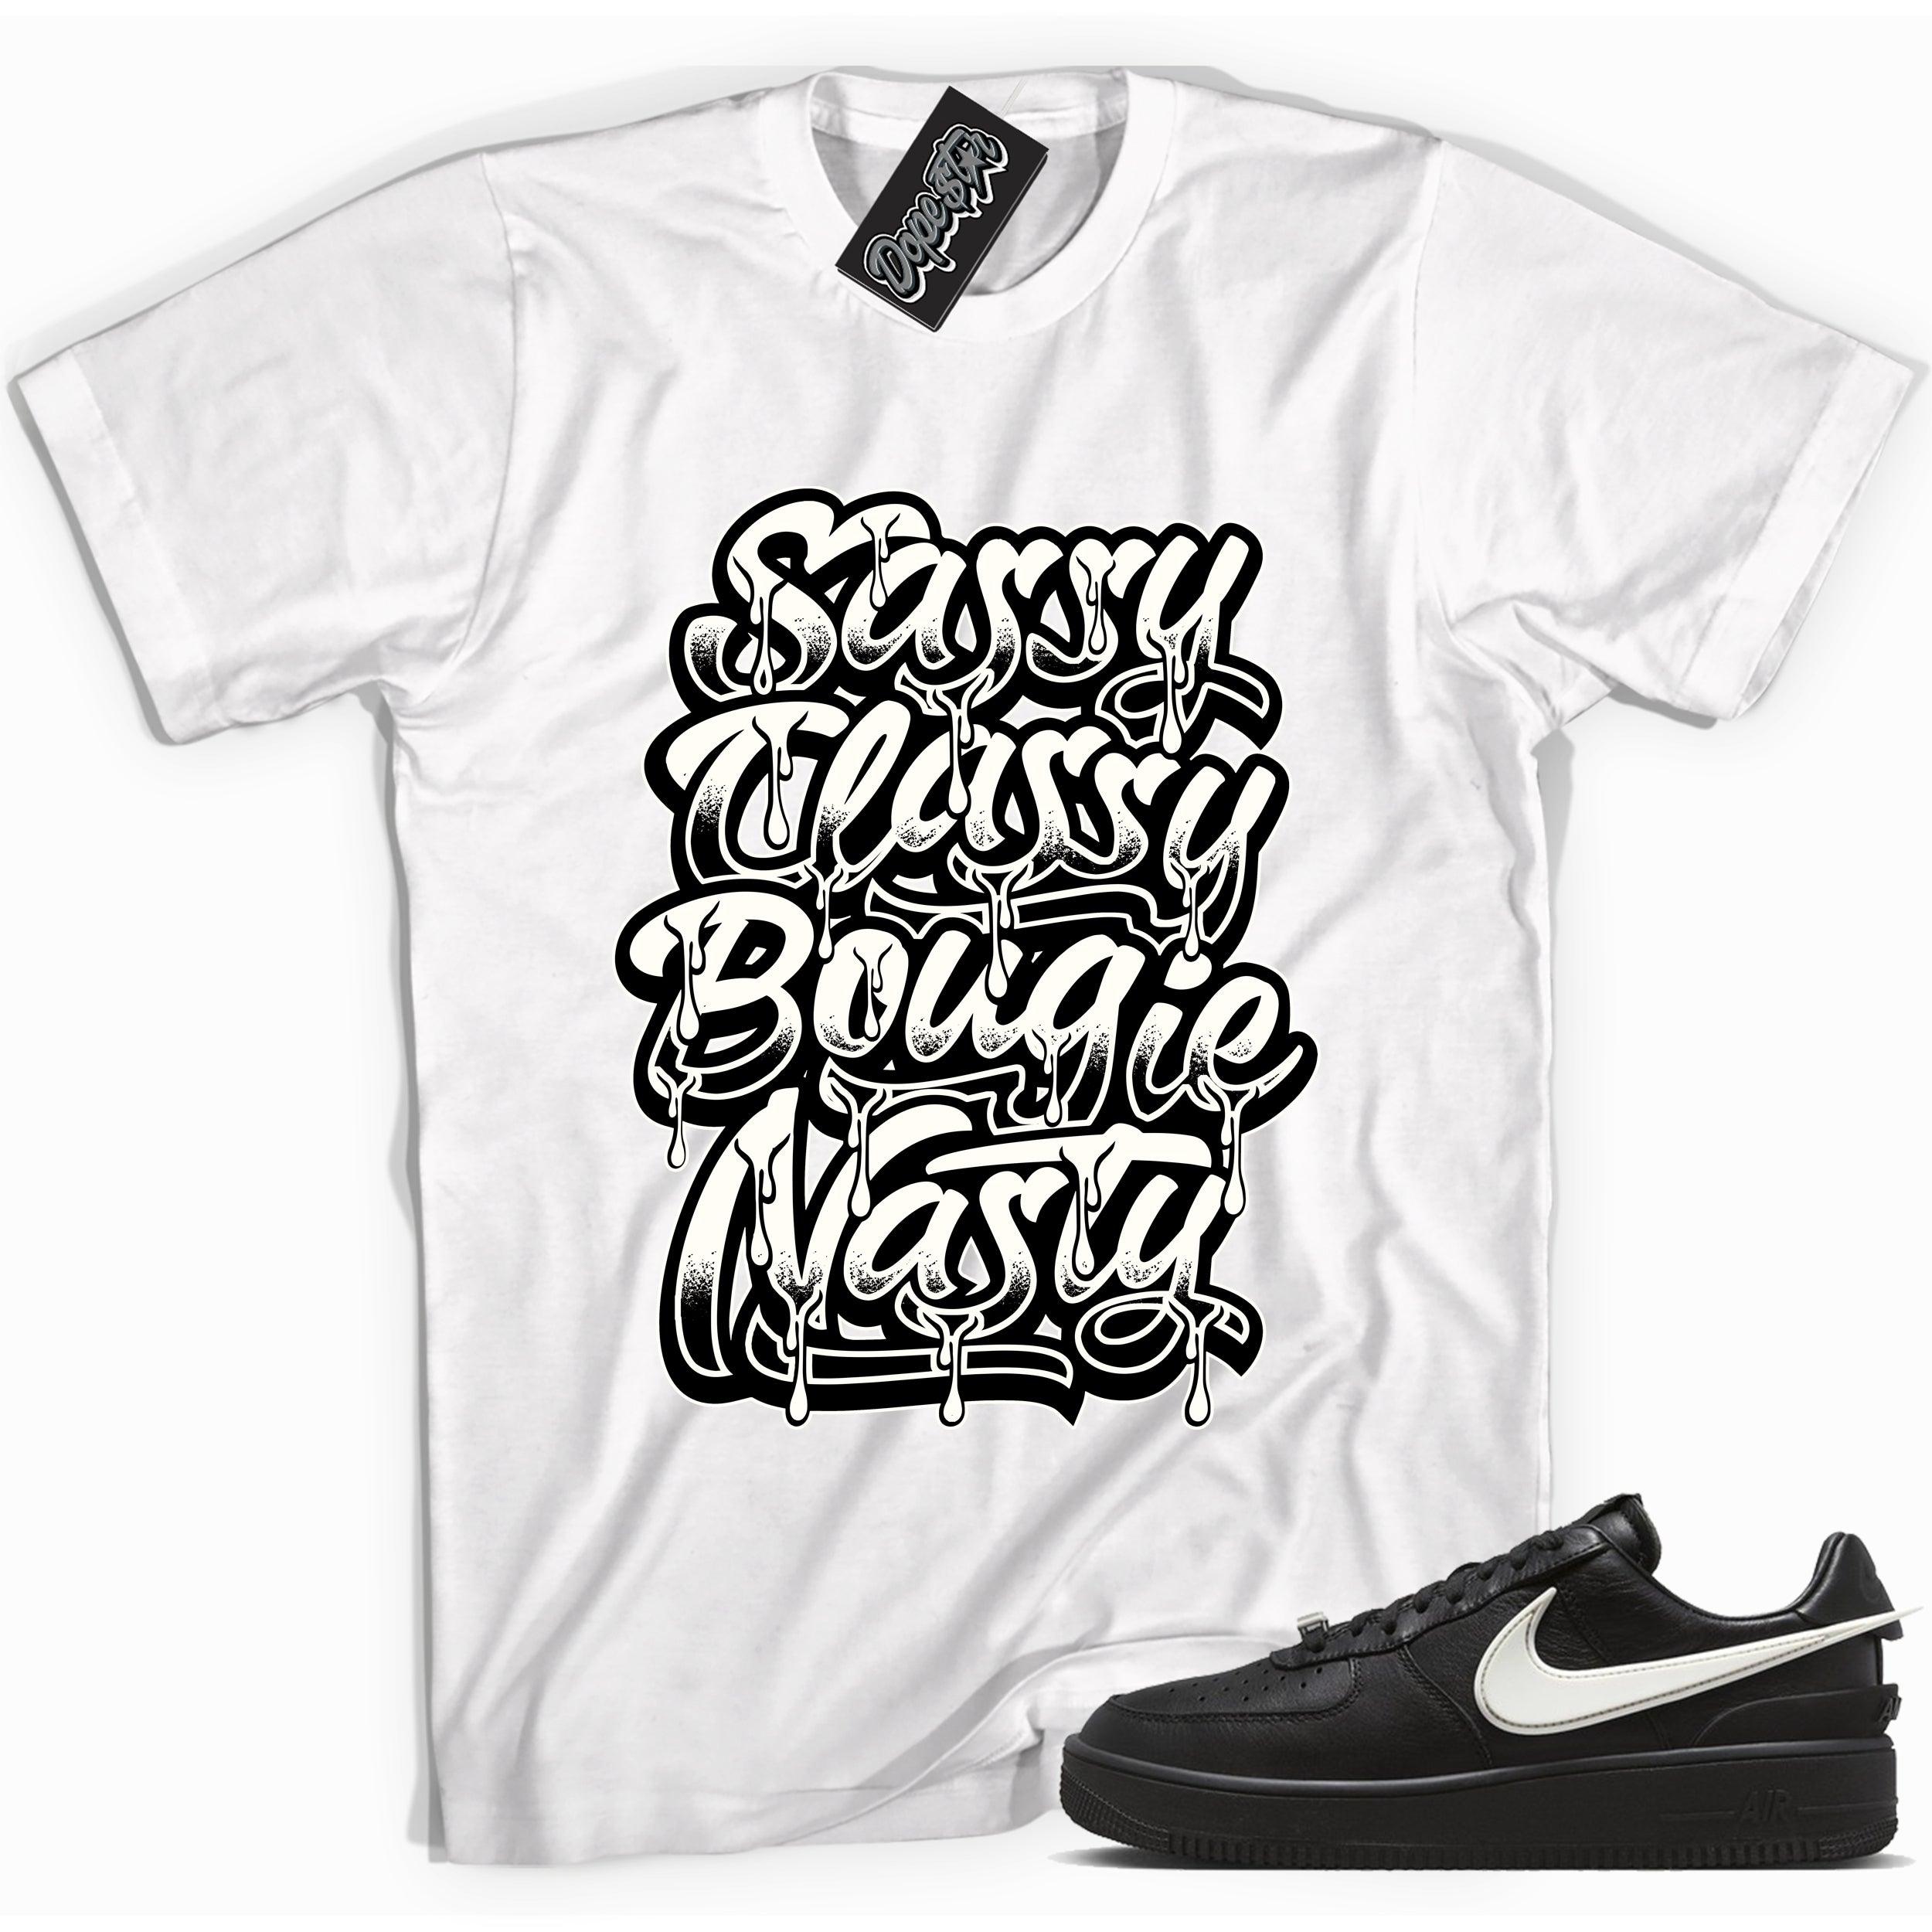 Cool white graphic tee with 'King' print, that perfectly matches Nike Air Force 1 Low Ambush Phantom Black sneakers